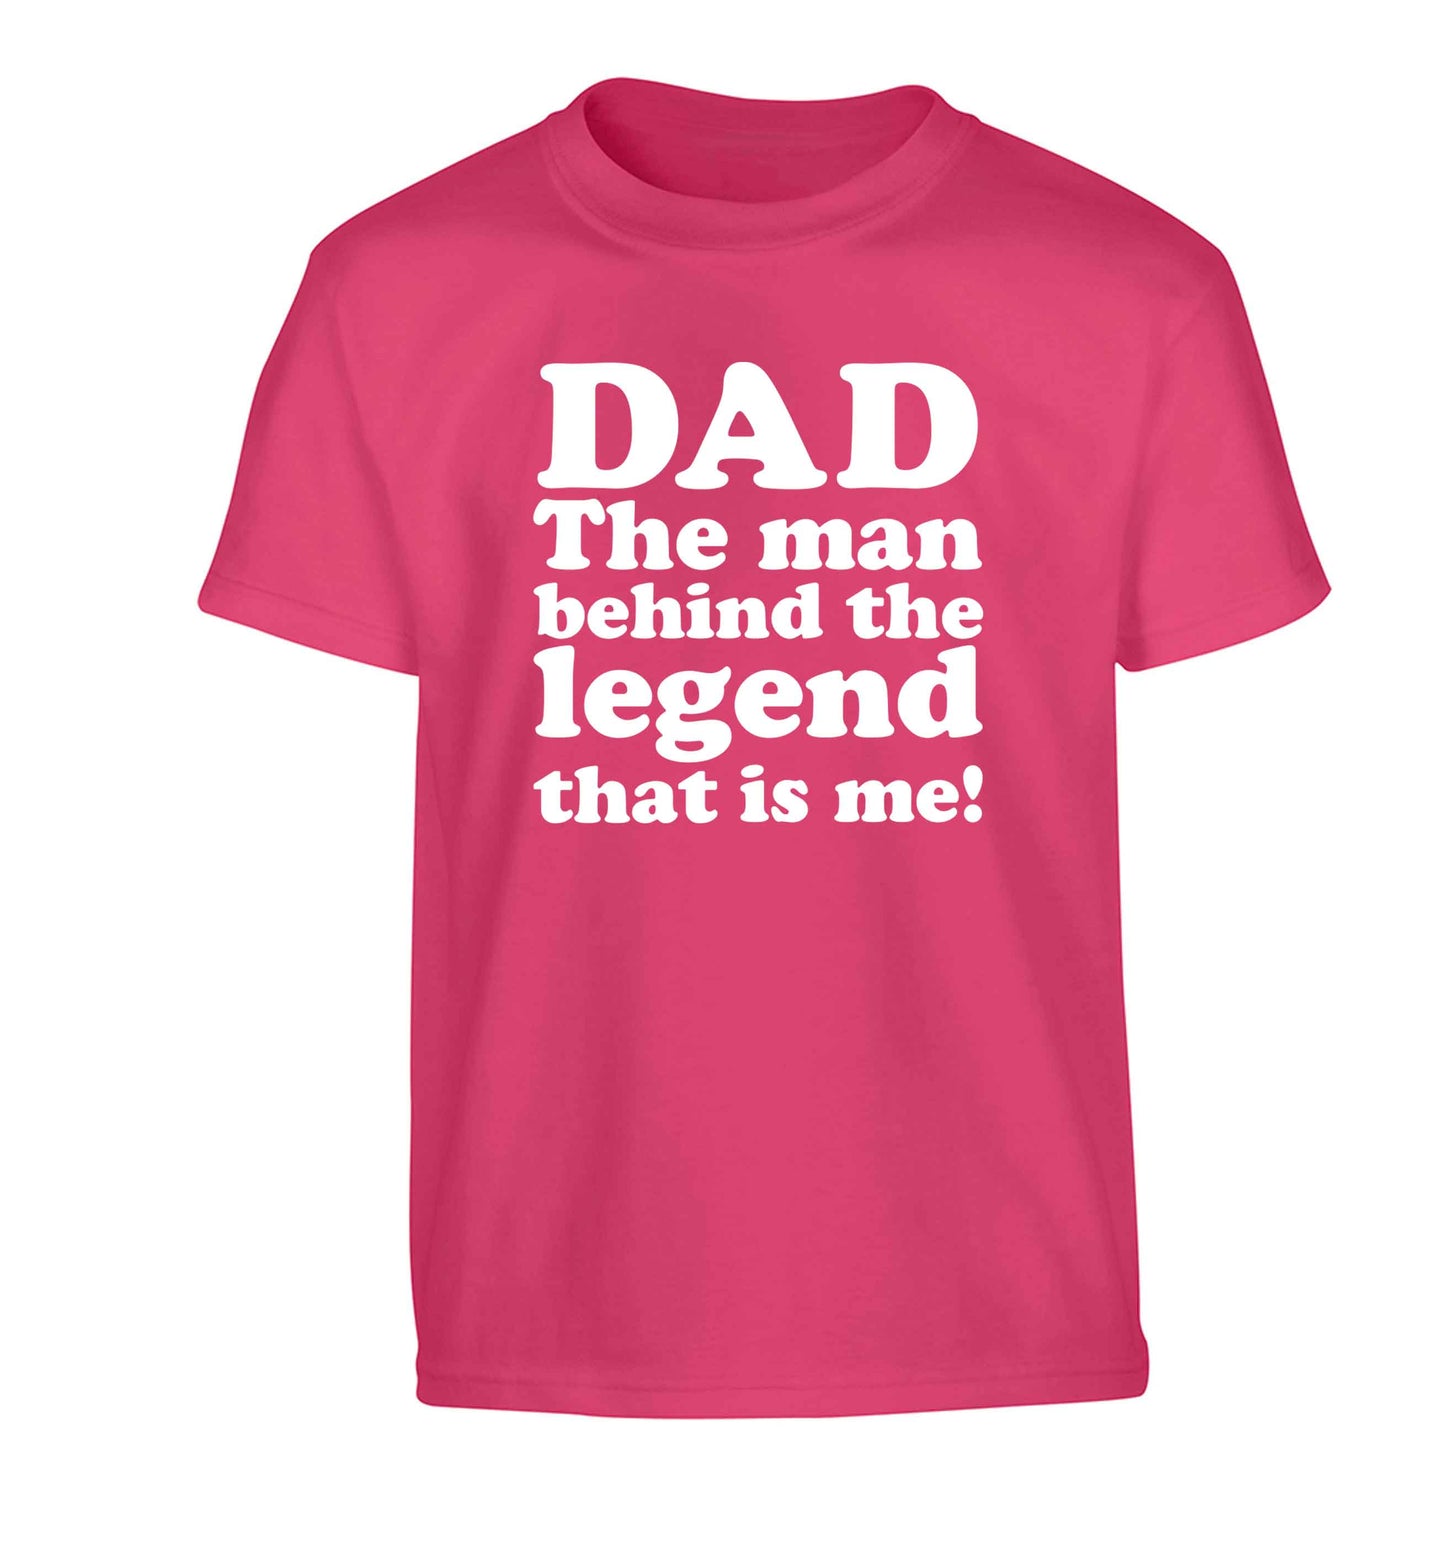 Dad the man behind the legend that is me Children's pink Tshirt 12-13 Years